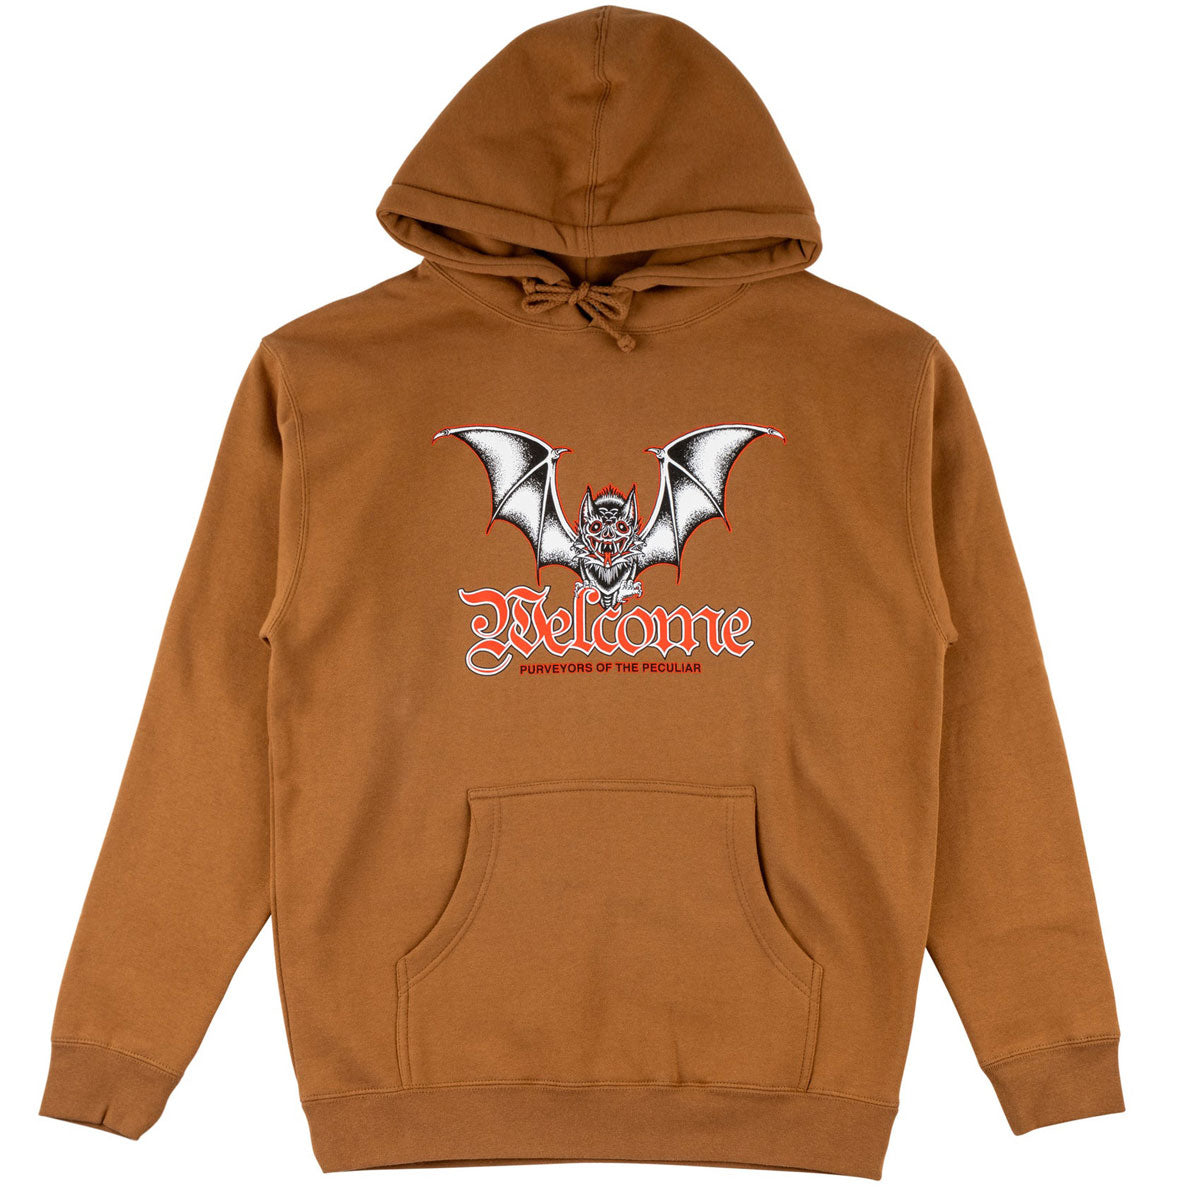 Welcome Nocturnal Hoodie - Brown image 1